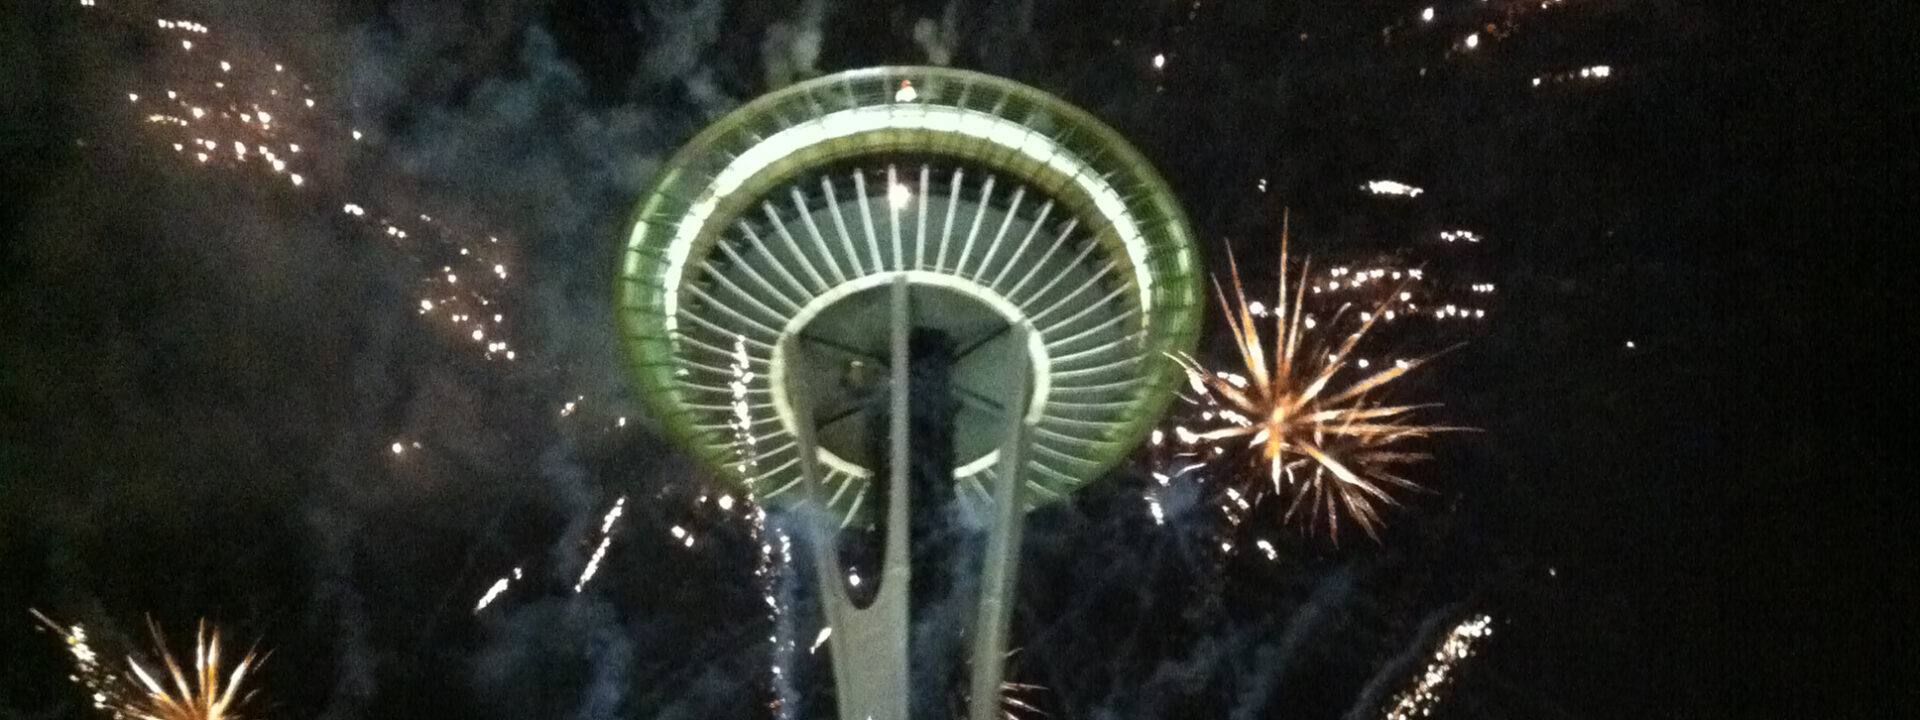 New Year’s Eve in Seattle